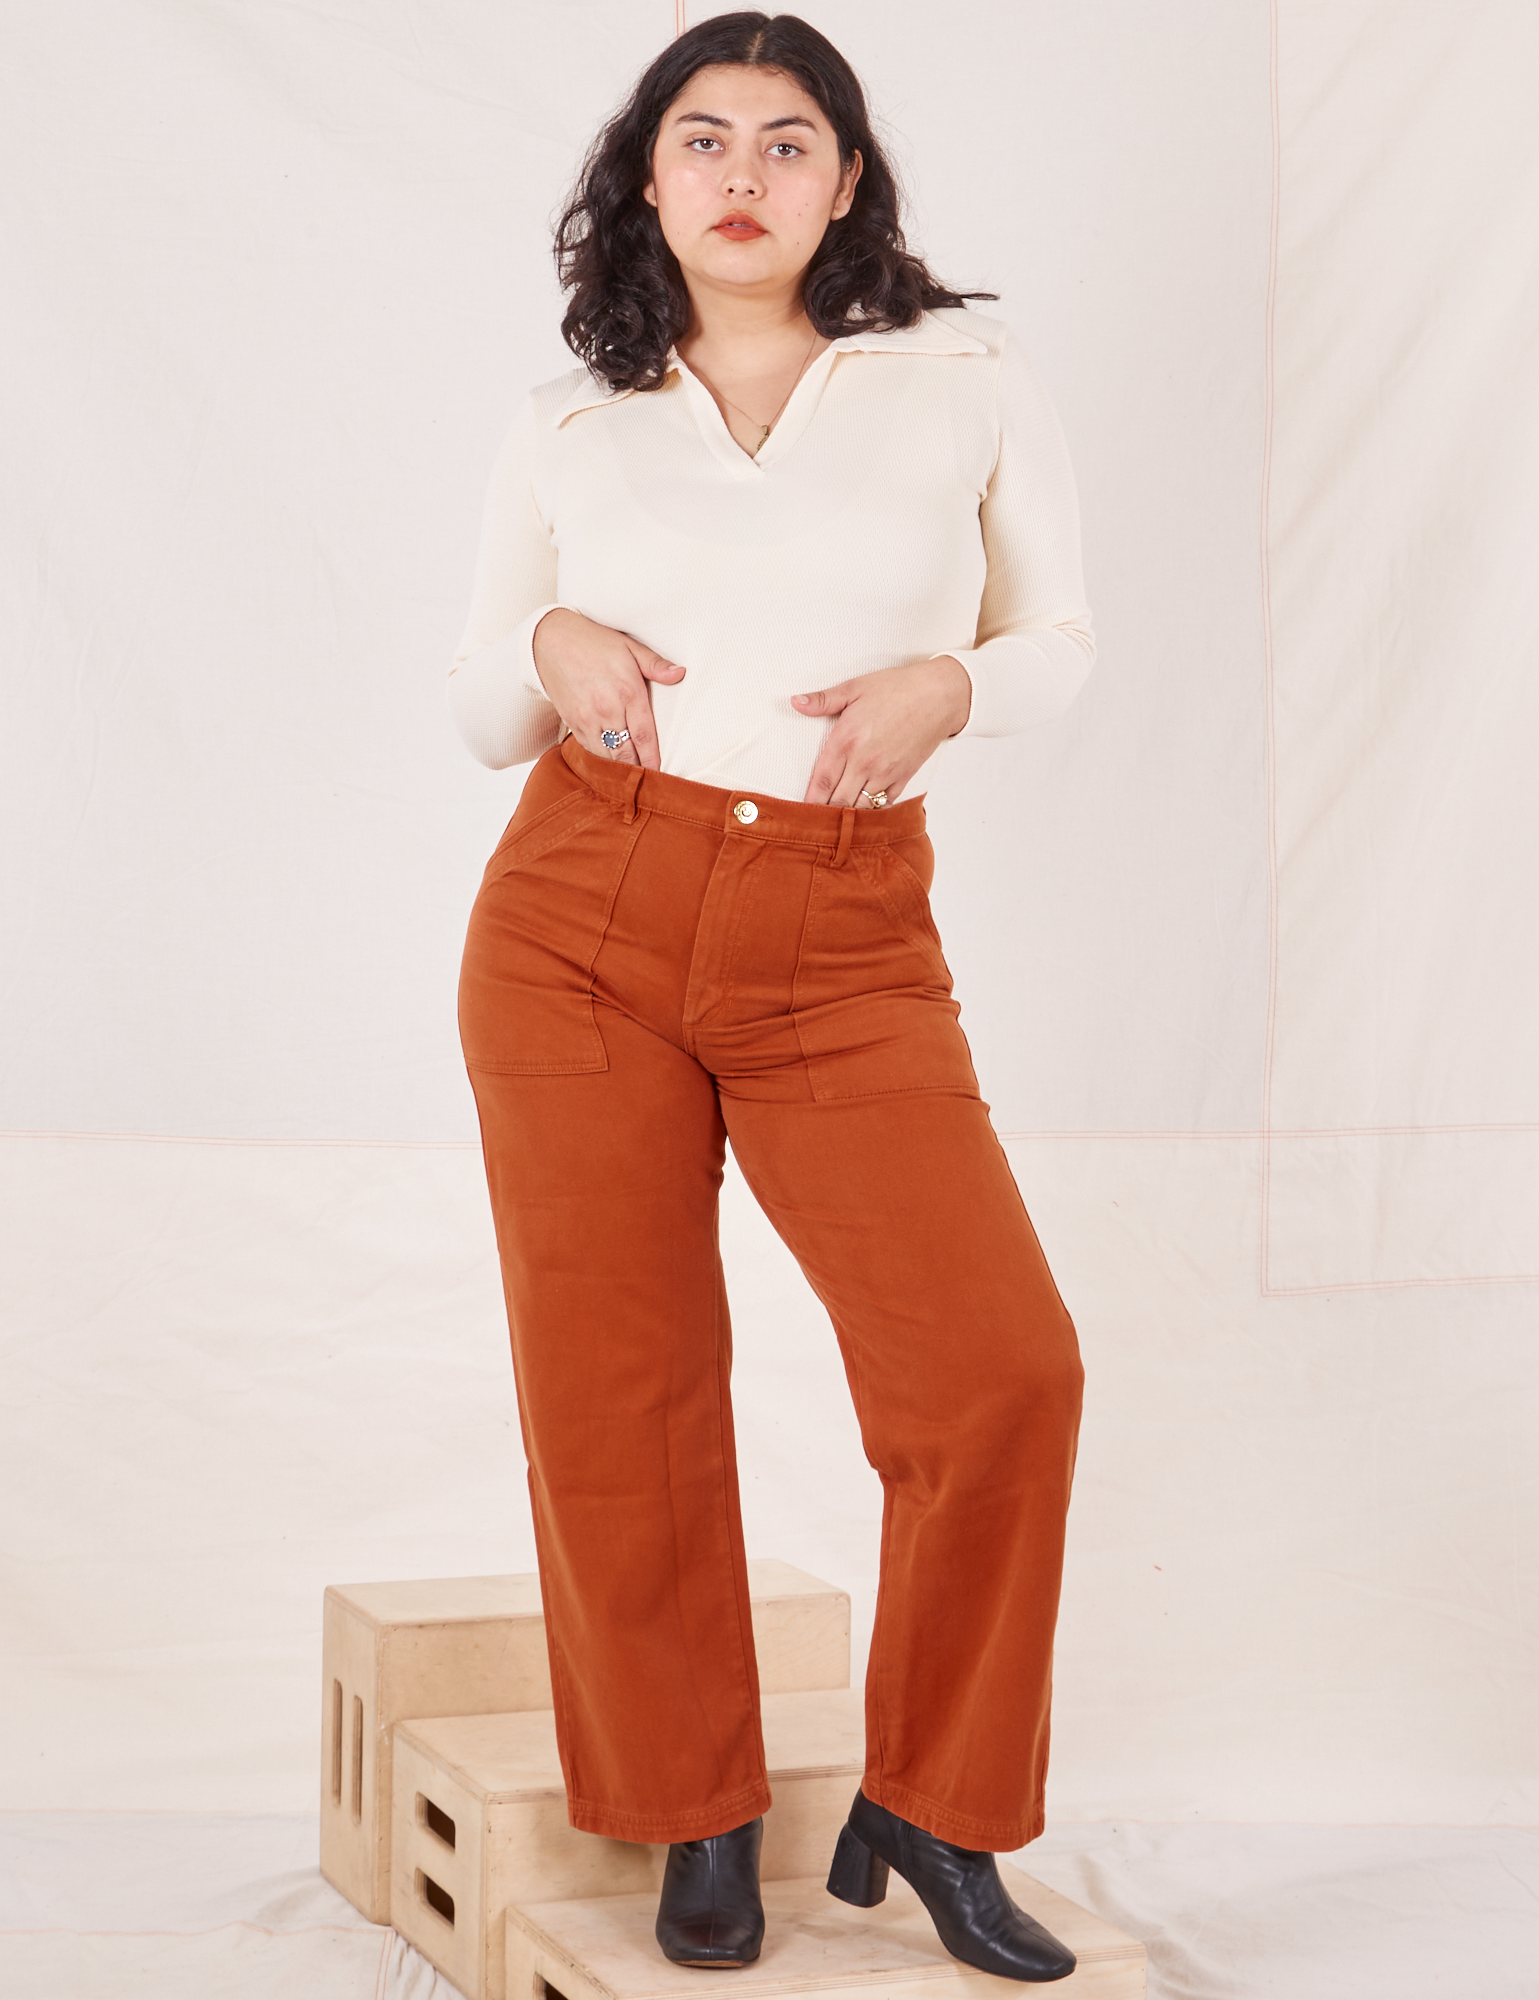 Melanie is 5&#39;6&quot; and wearing M Organic Work Pants in Burnt Terracotta paired with vintage off-white Long Sleeve Fisherman Polo